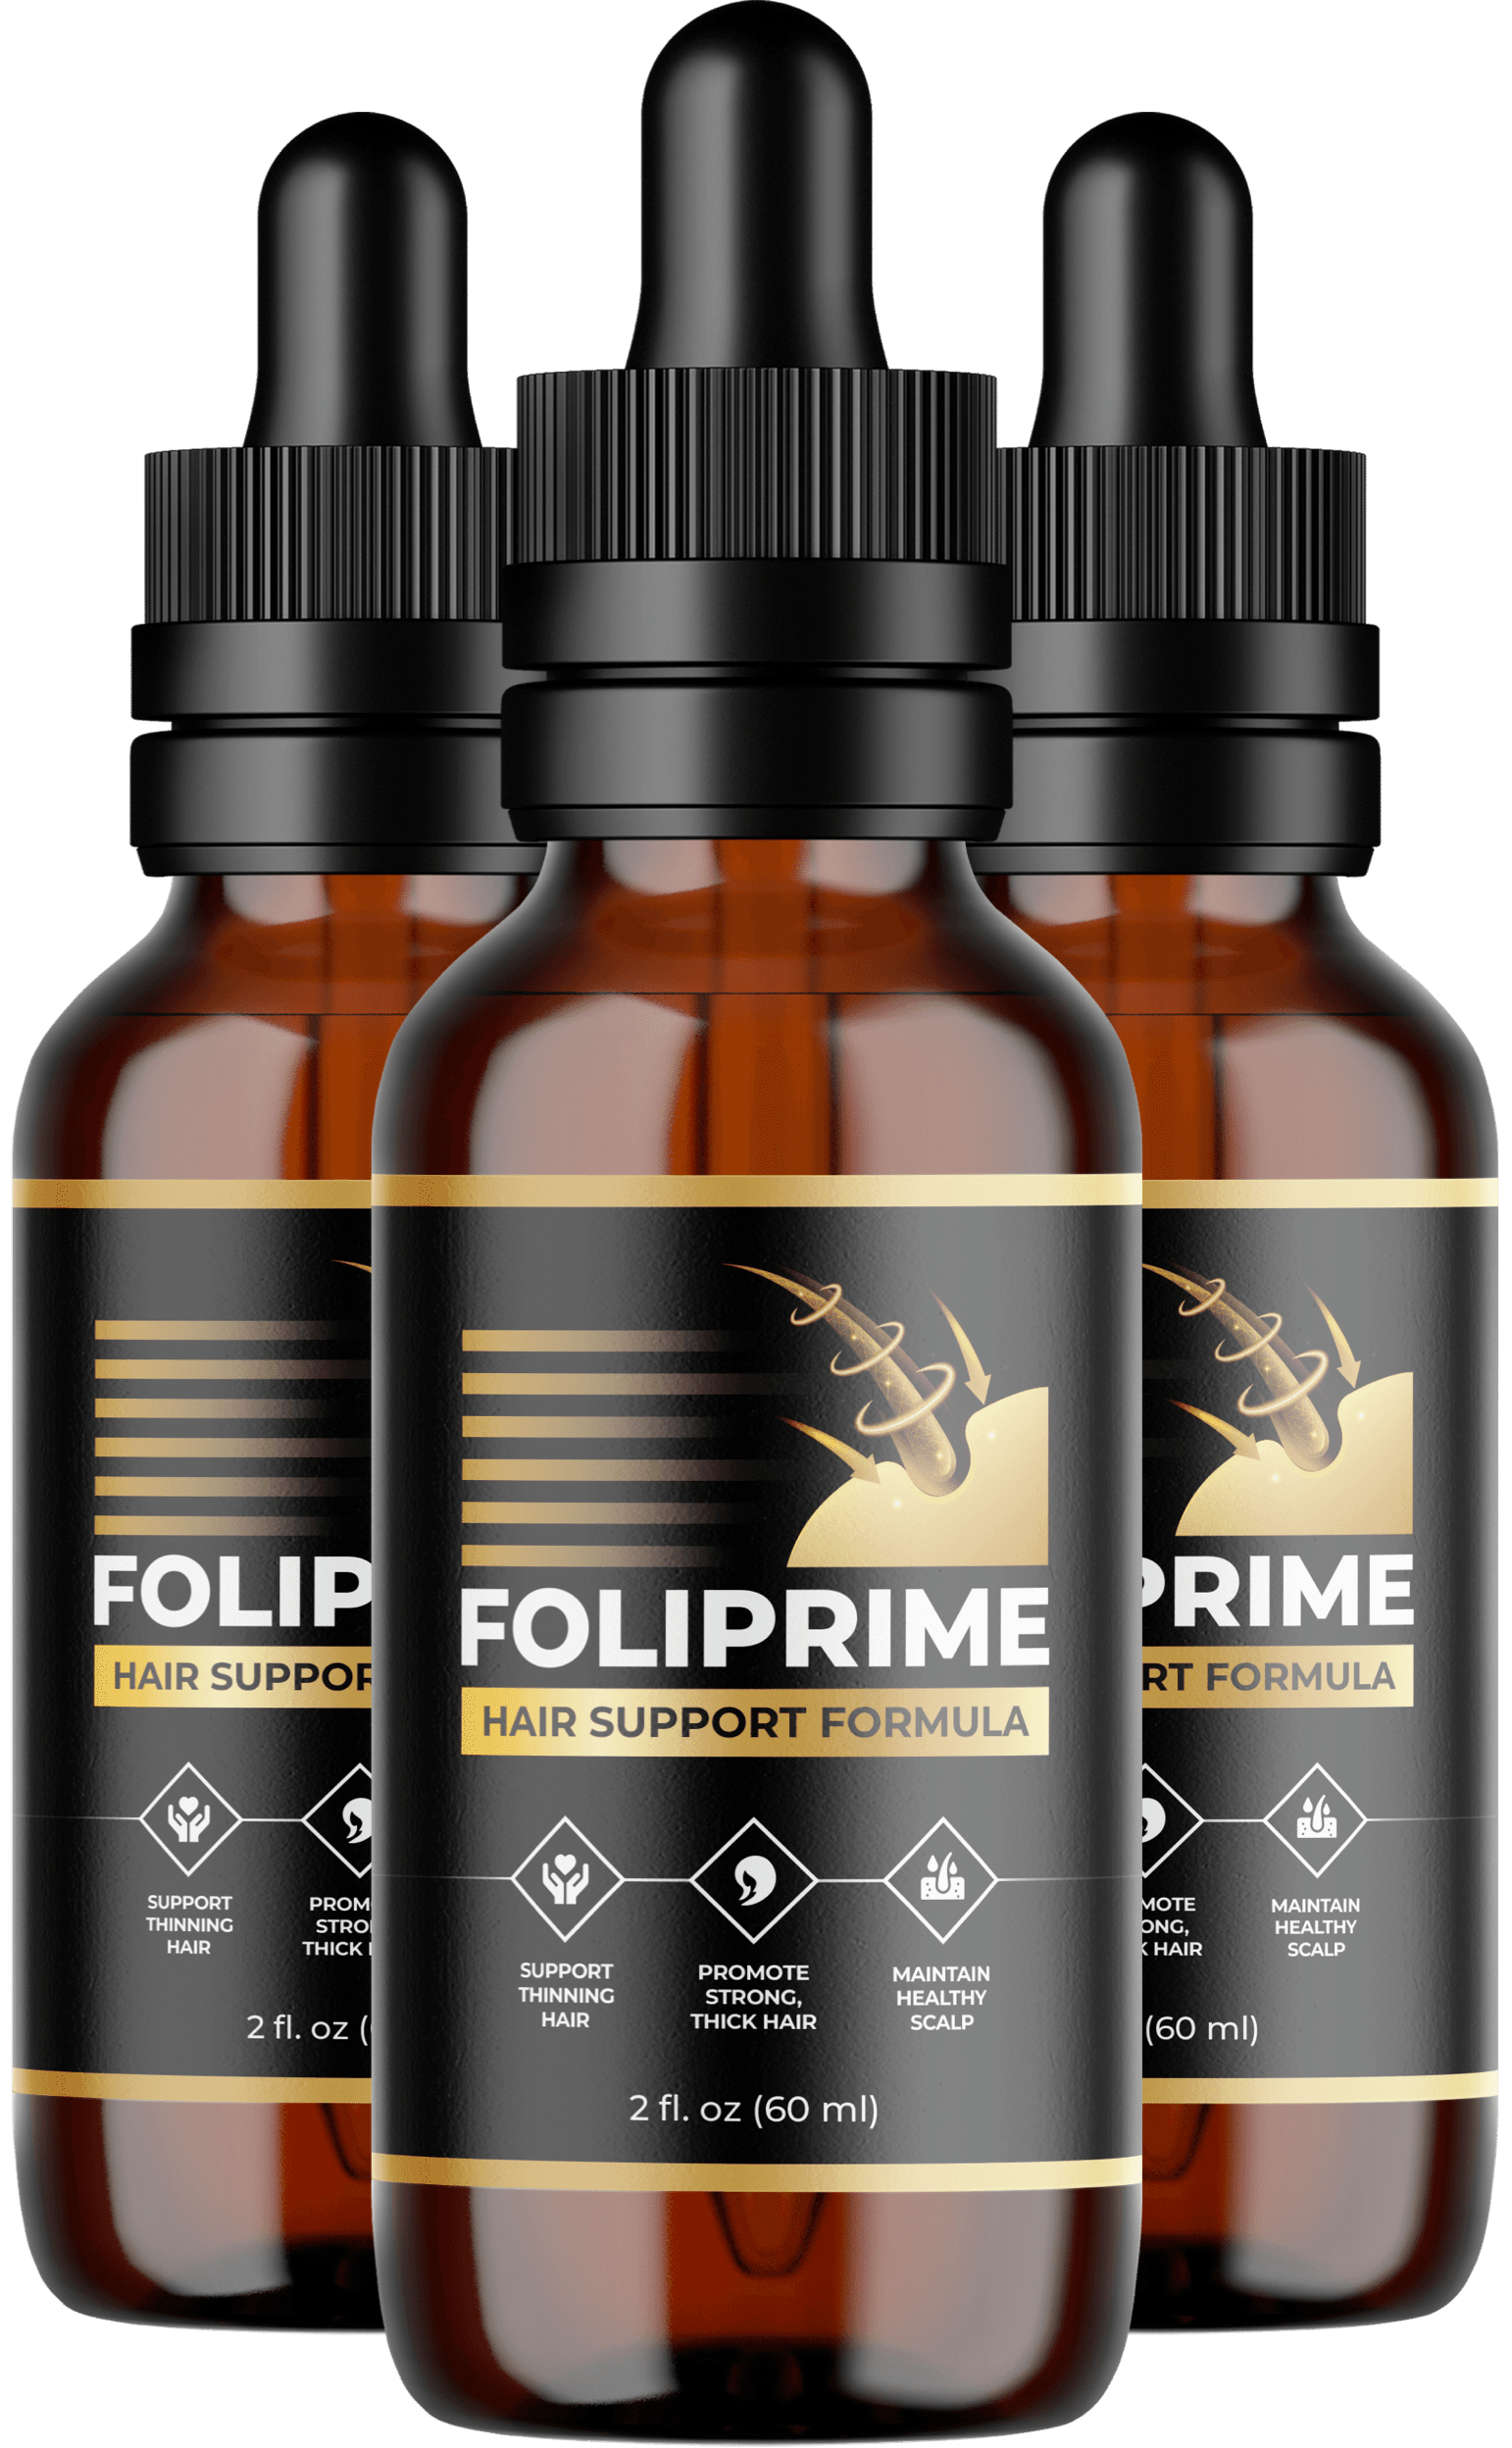 FoliPrime: The Revolutionary Hair Growth Supplement That Actually Works